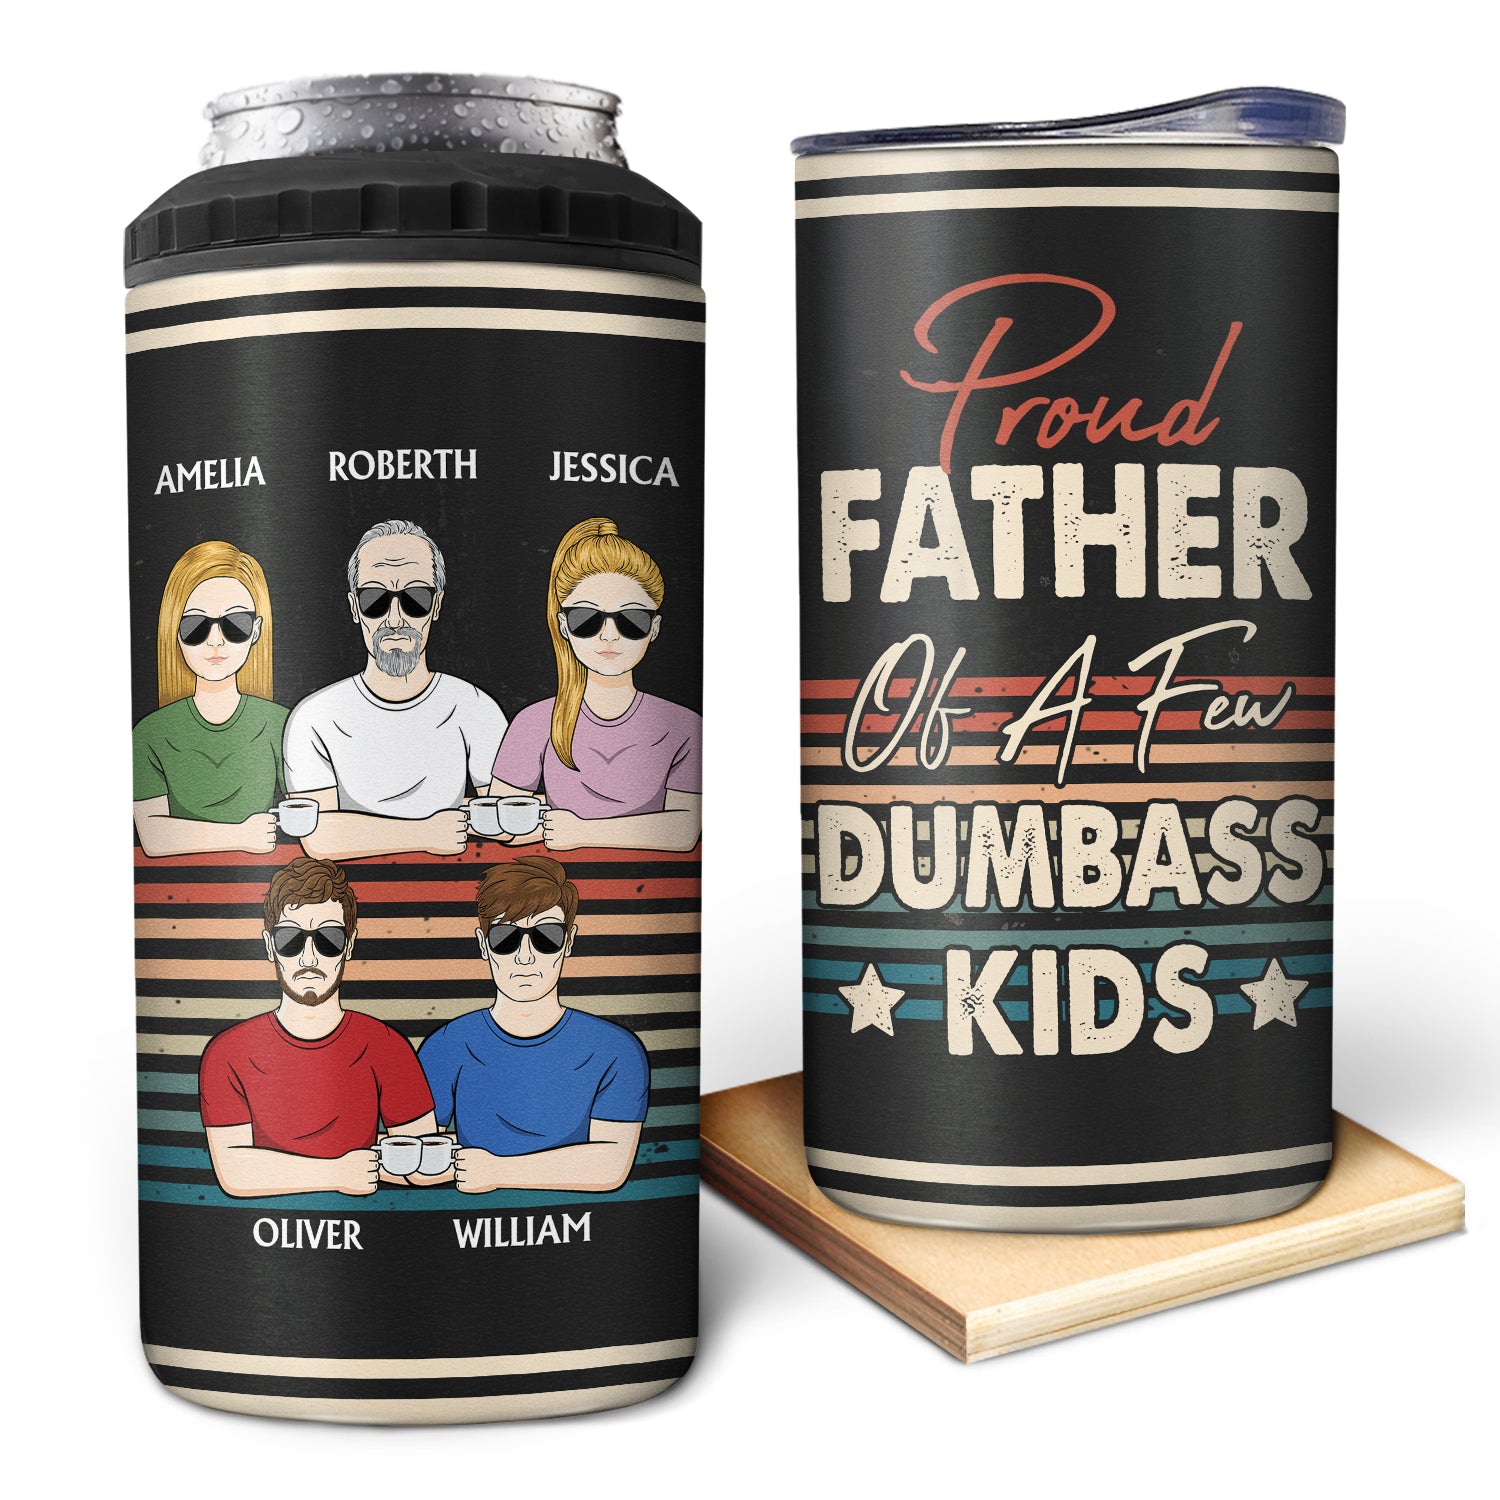 Proud Father Of A Few - Funny Gift For Dad, Father, Grandpa - Personalized 4 In 1 Can Cooler Tumbler